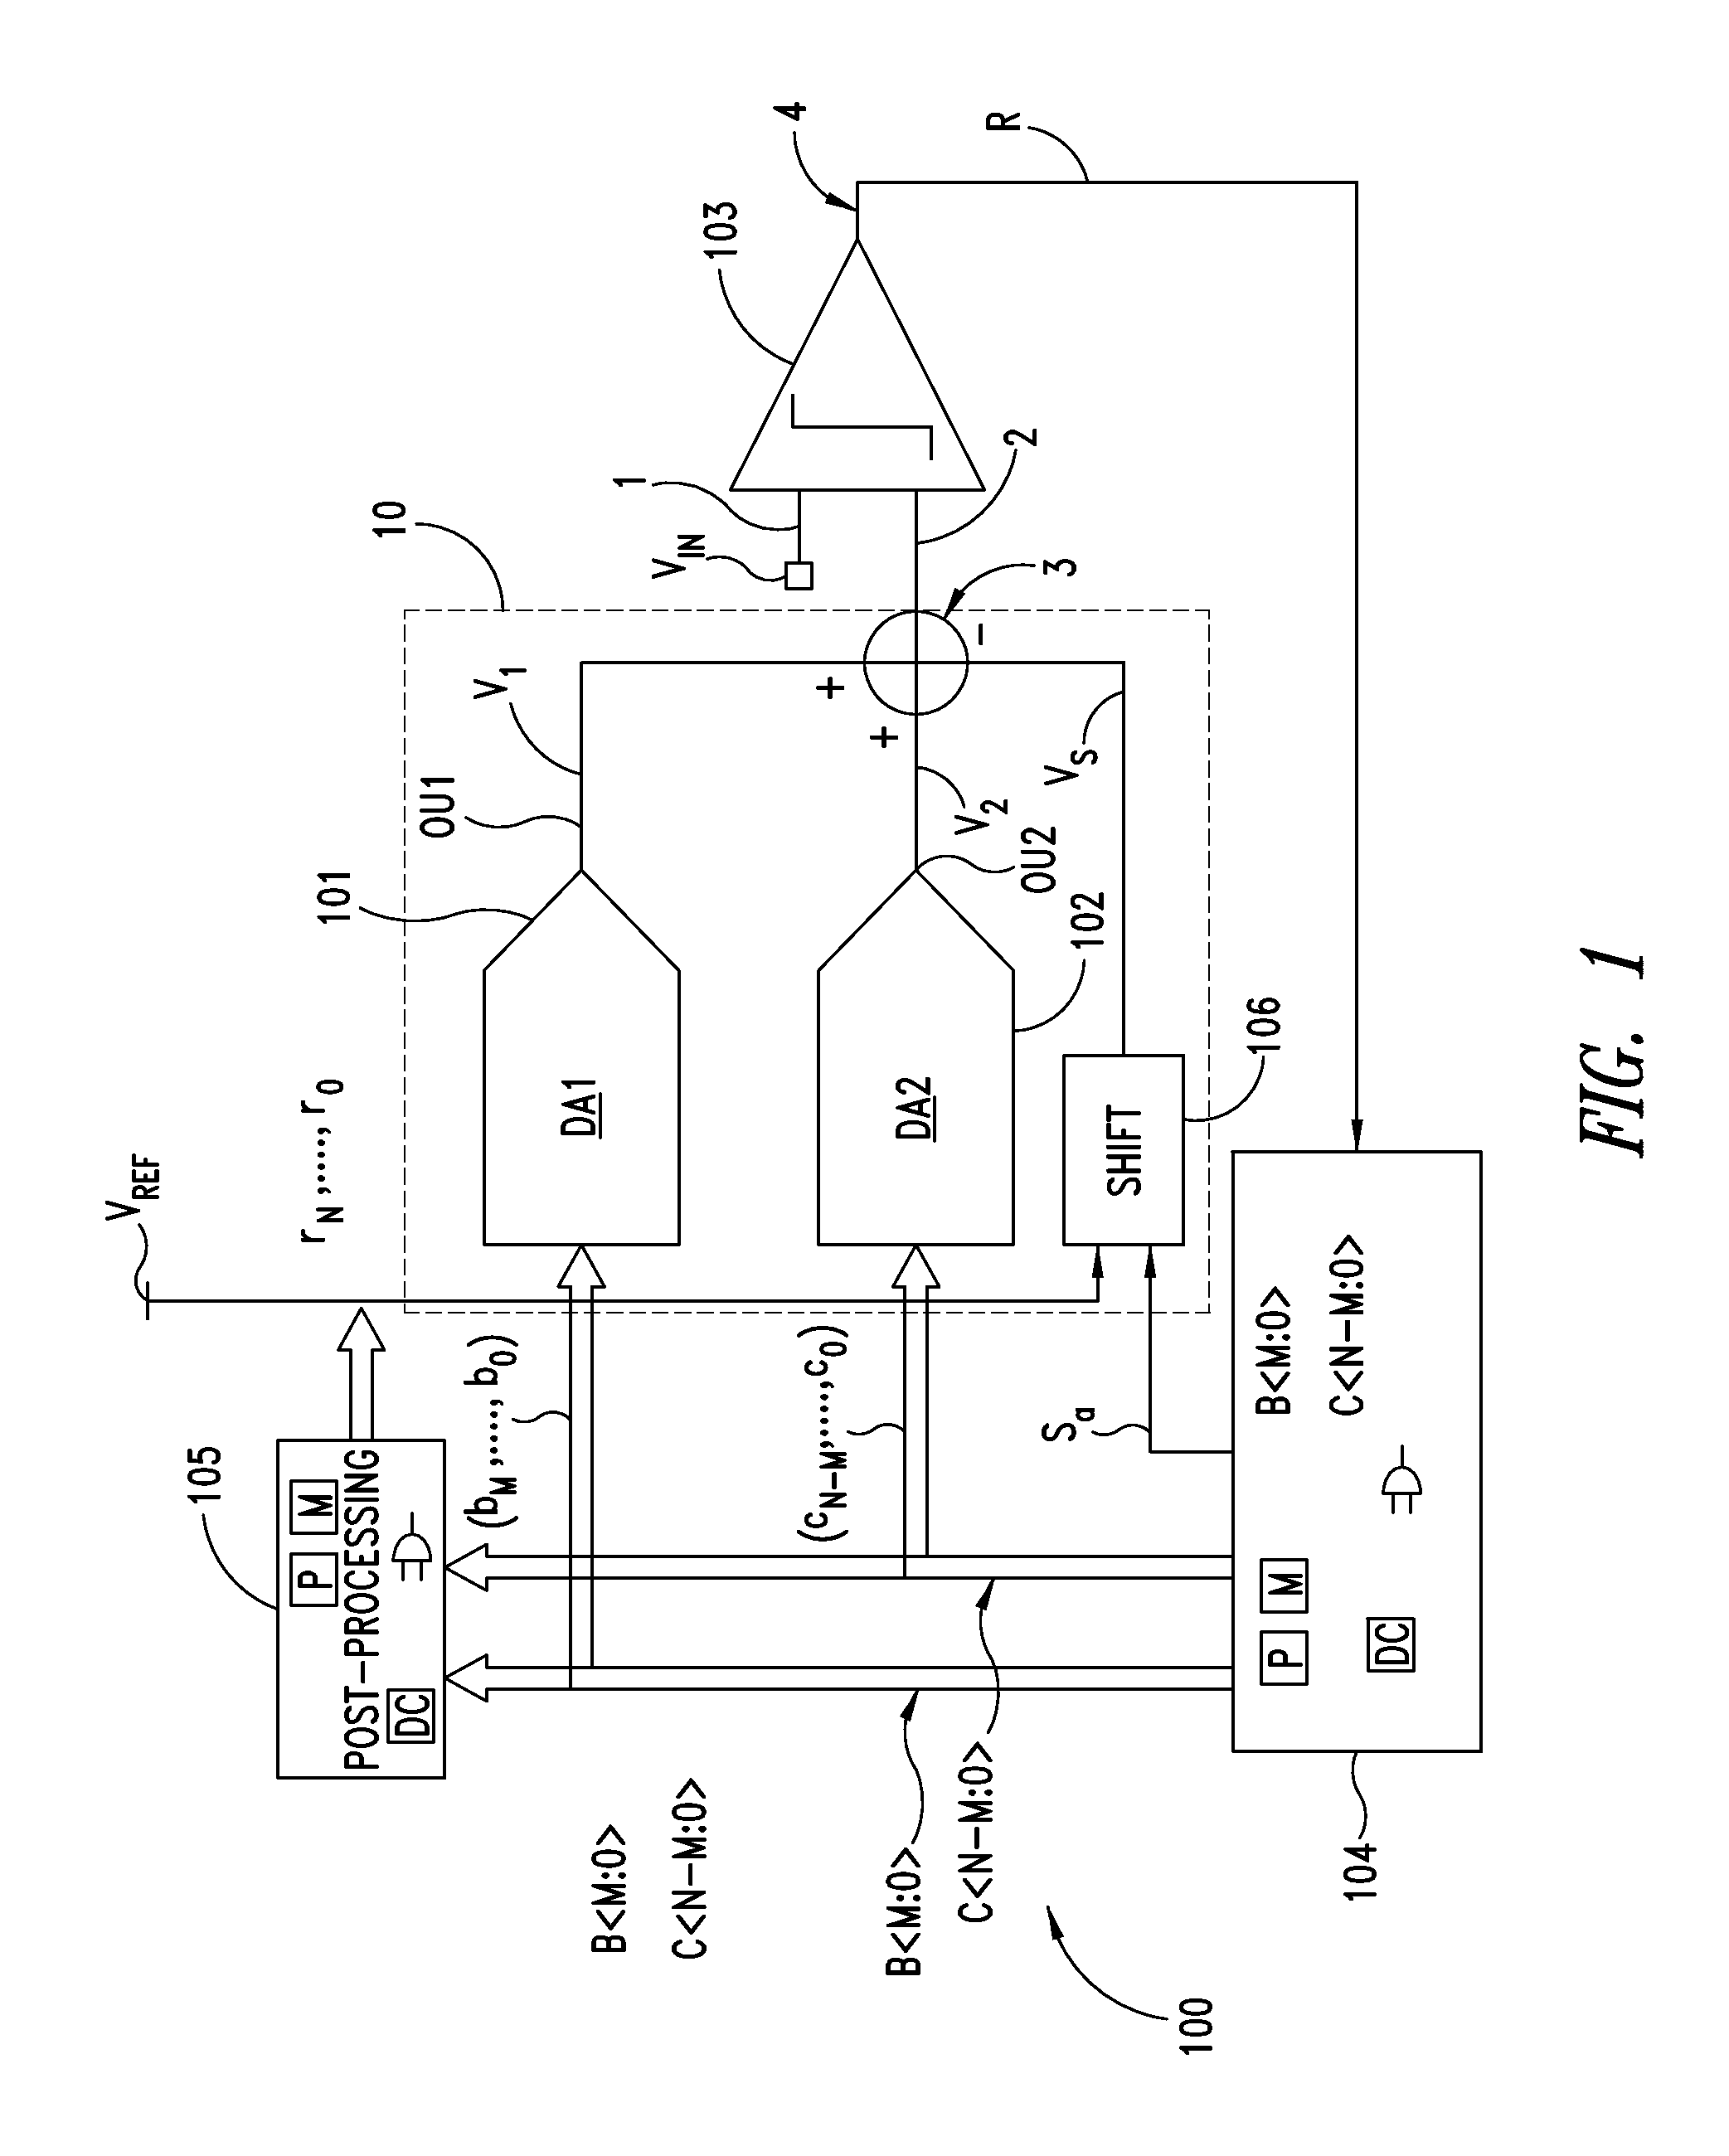 Method for digital error correction for binary successive approximation analog-to-digital converter (ADC)